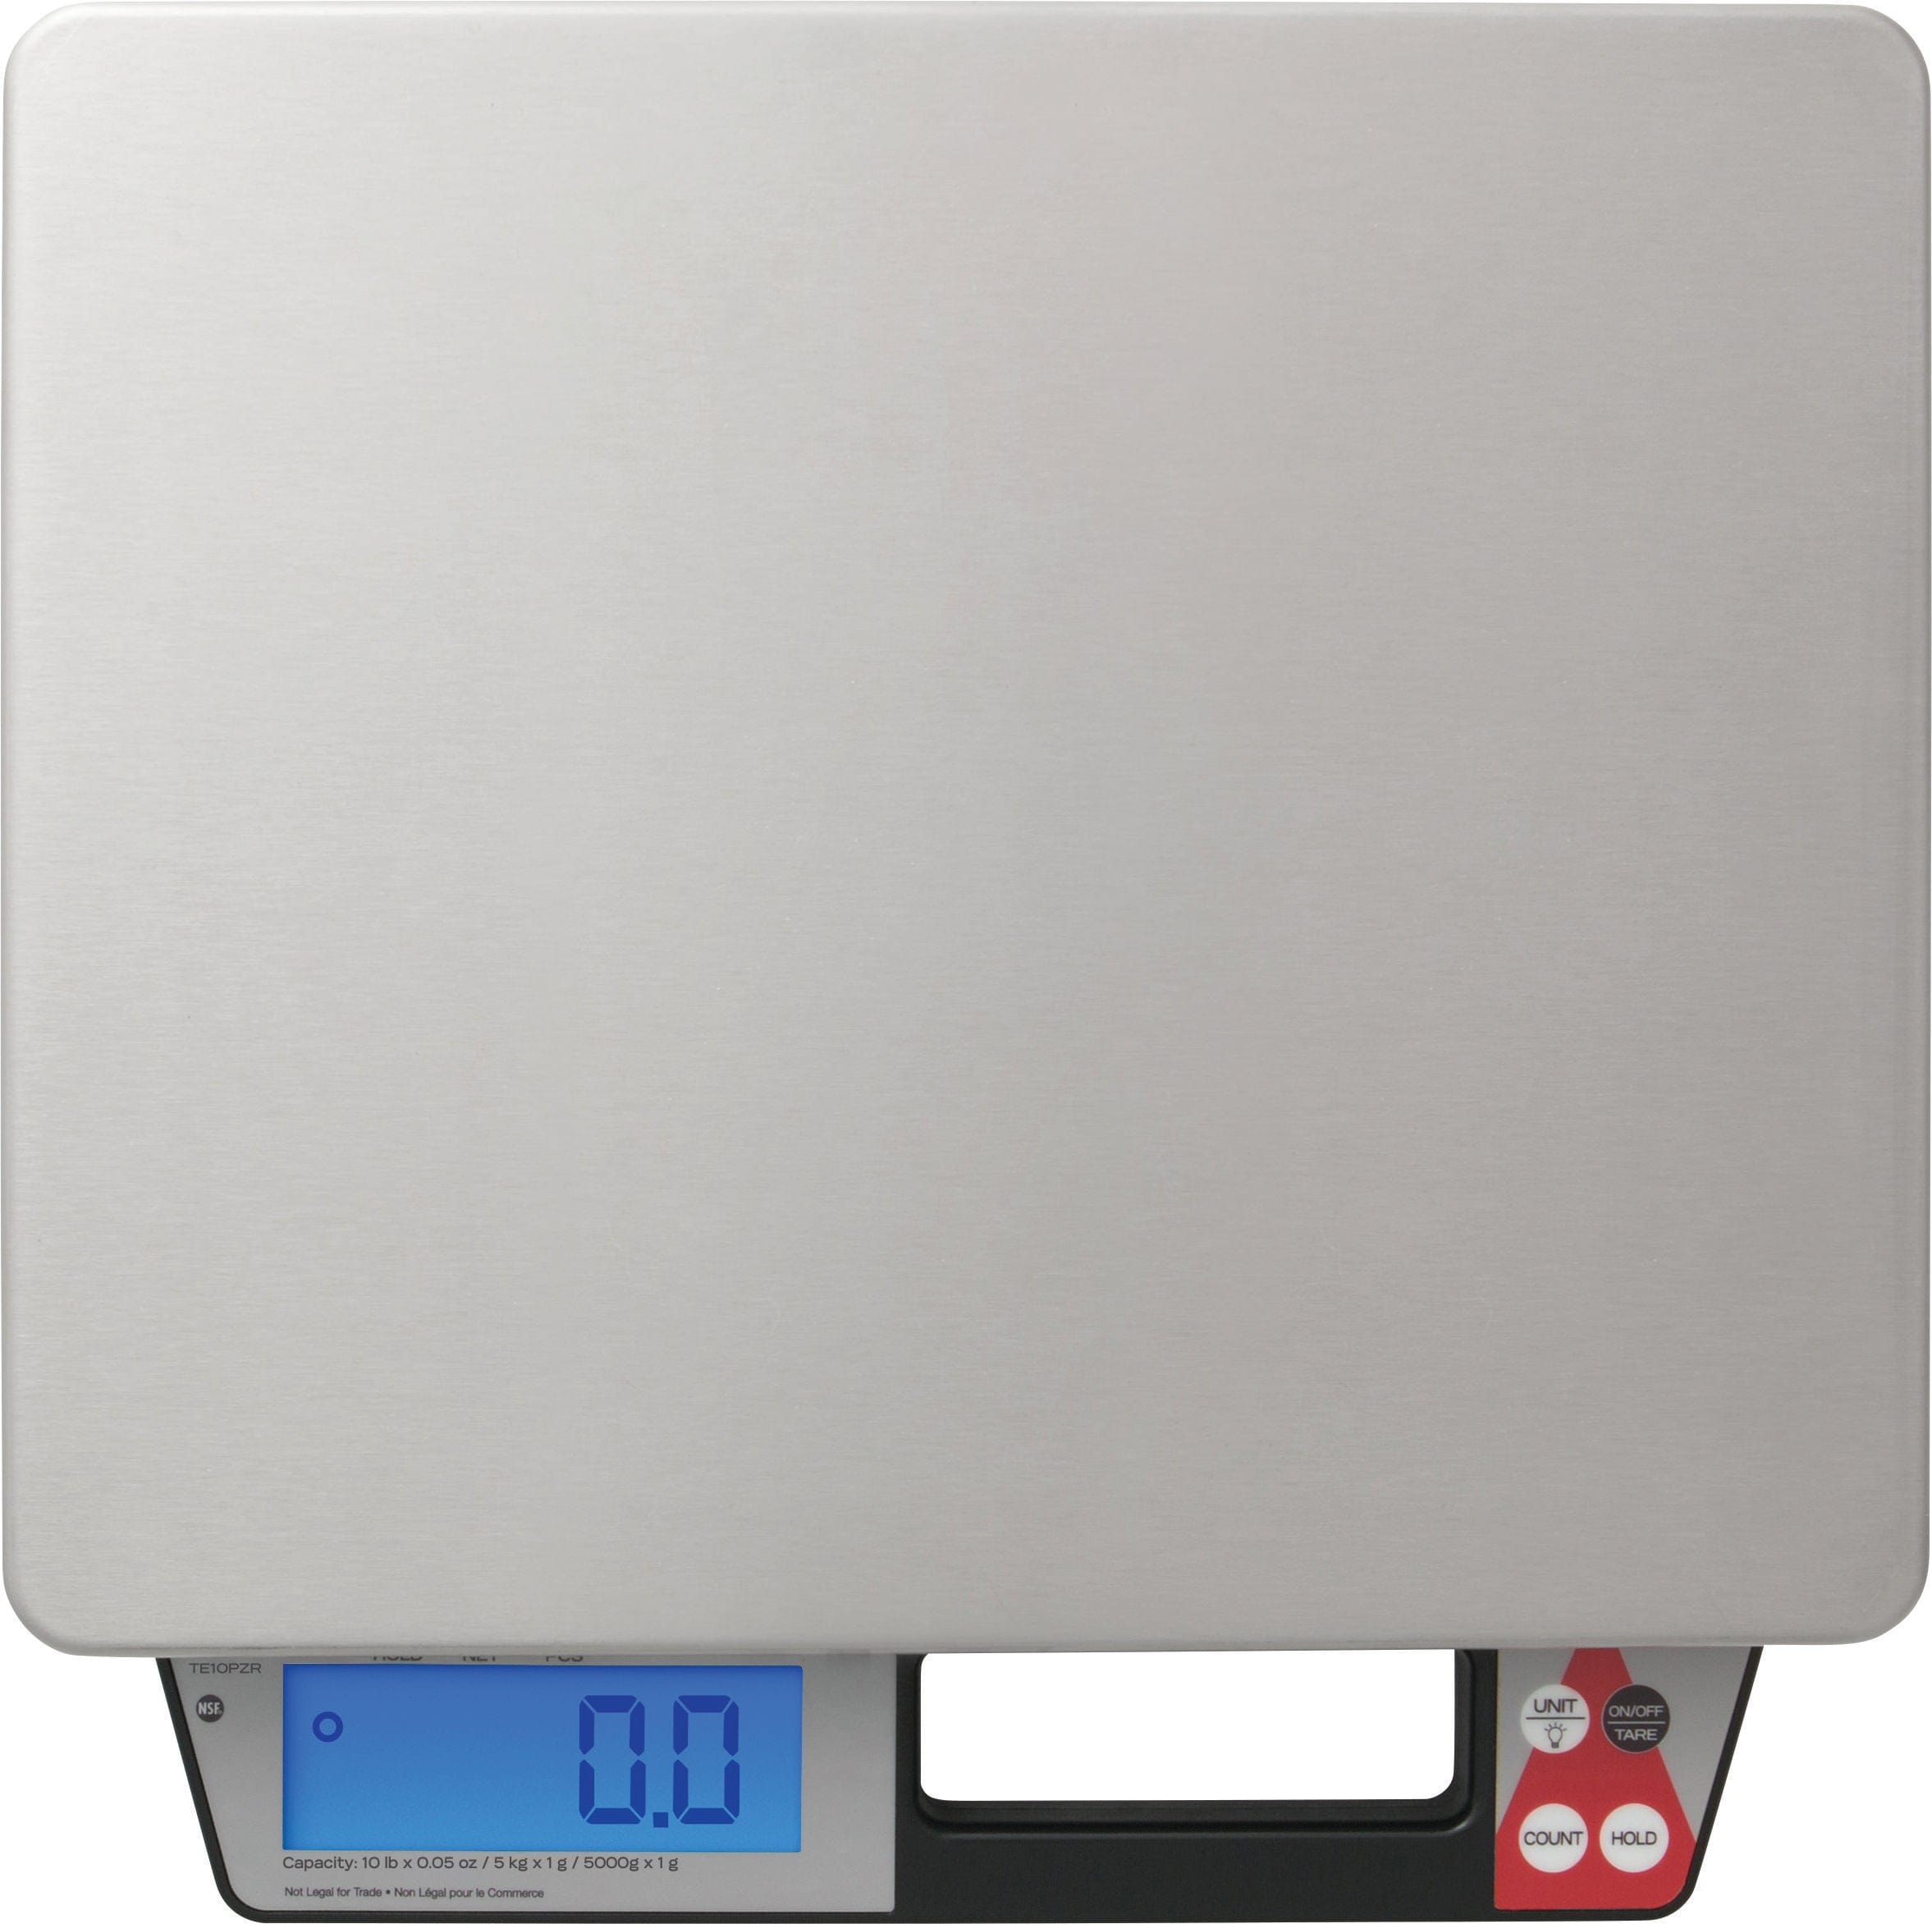 Commercial Scales – Taylor USA